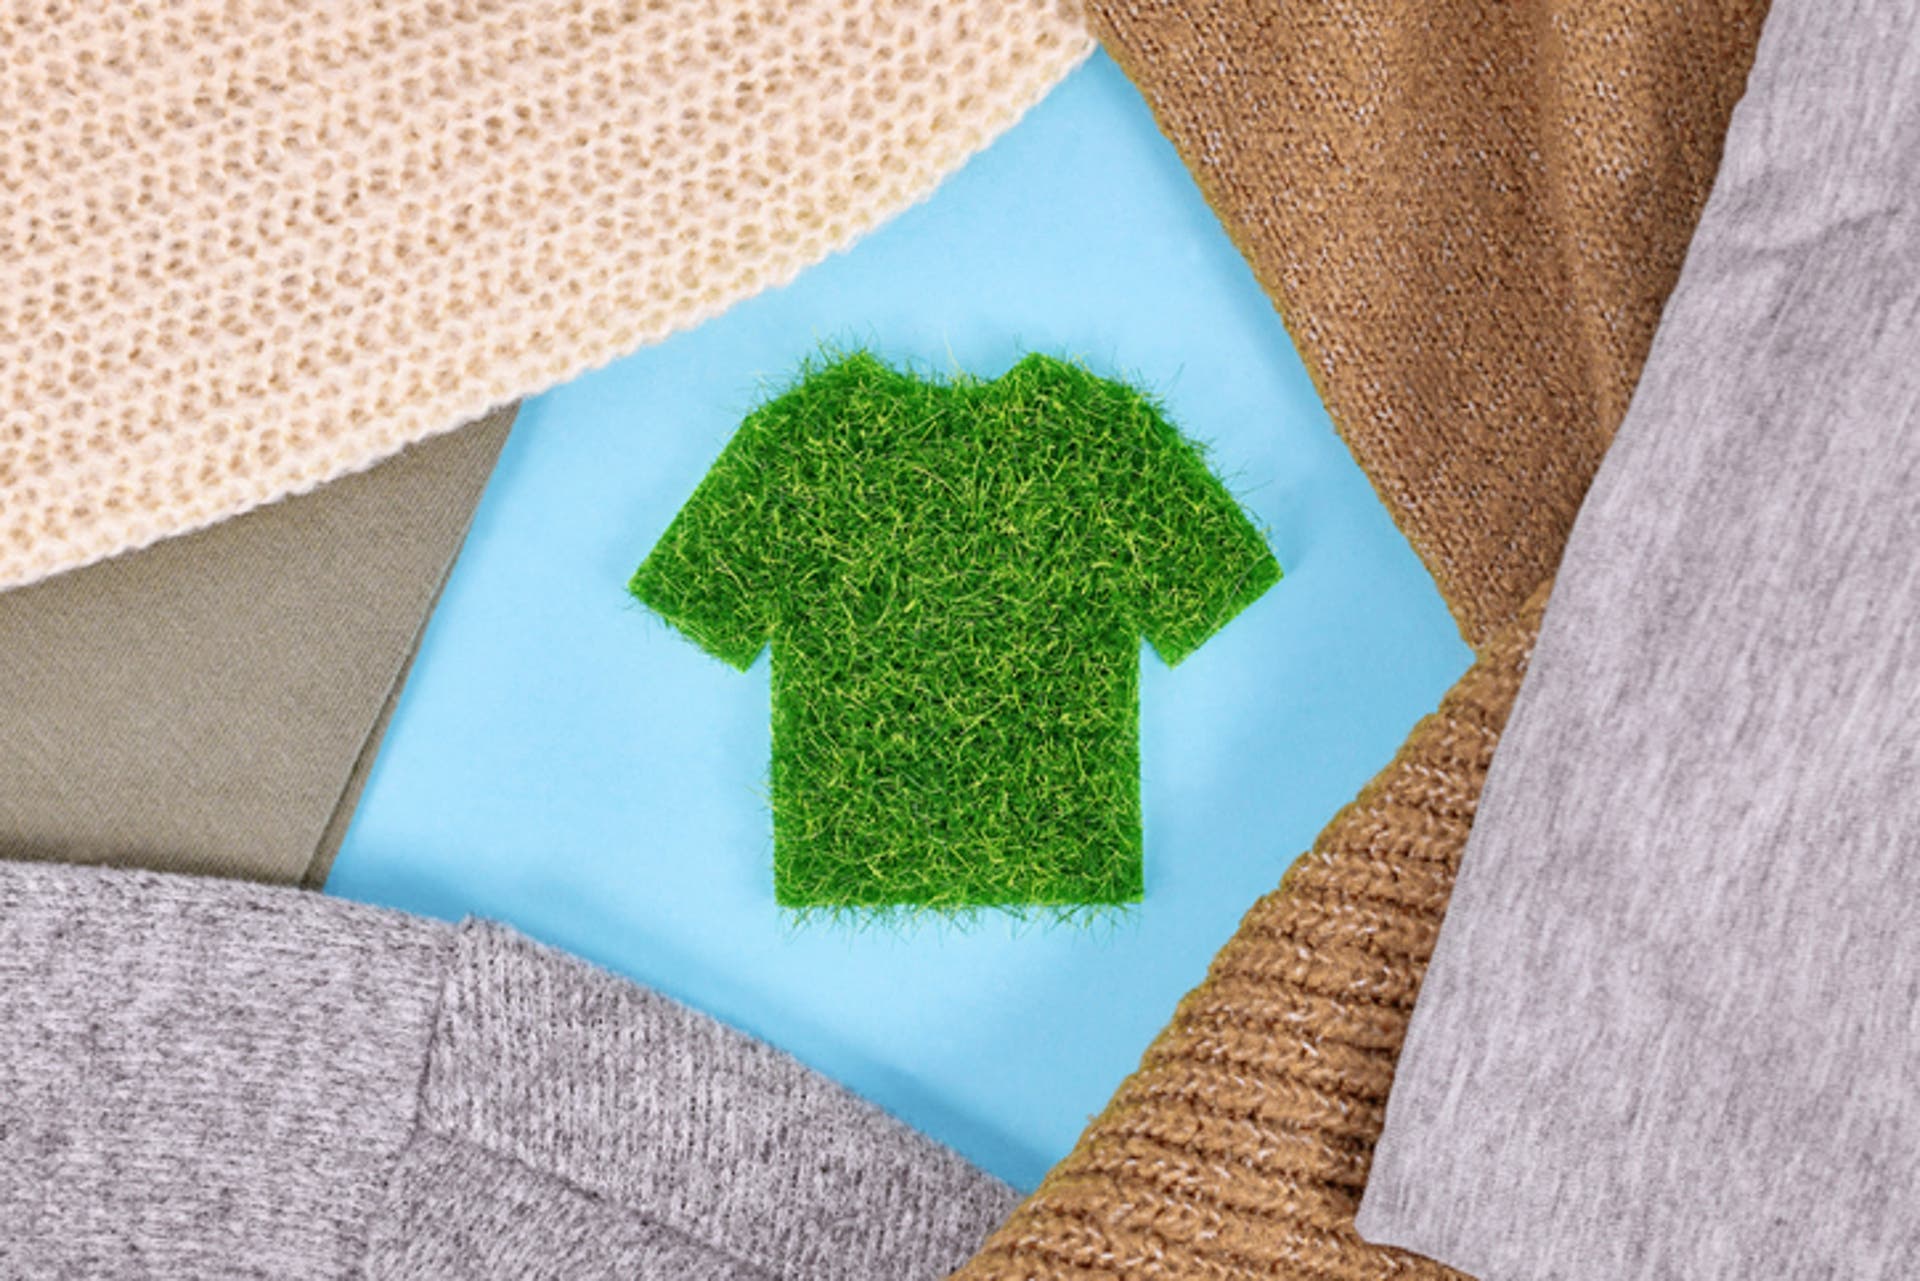  A shirt made out of grass surrounded by sweaters 